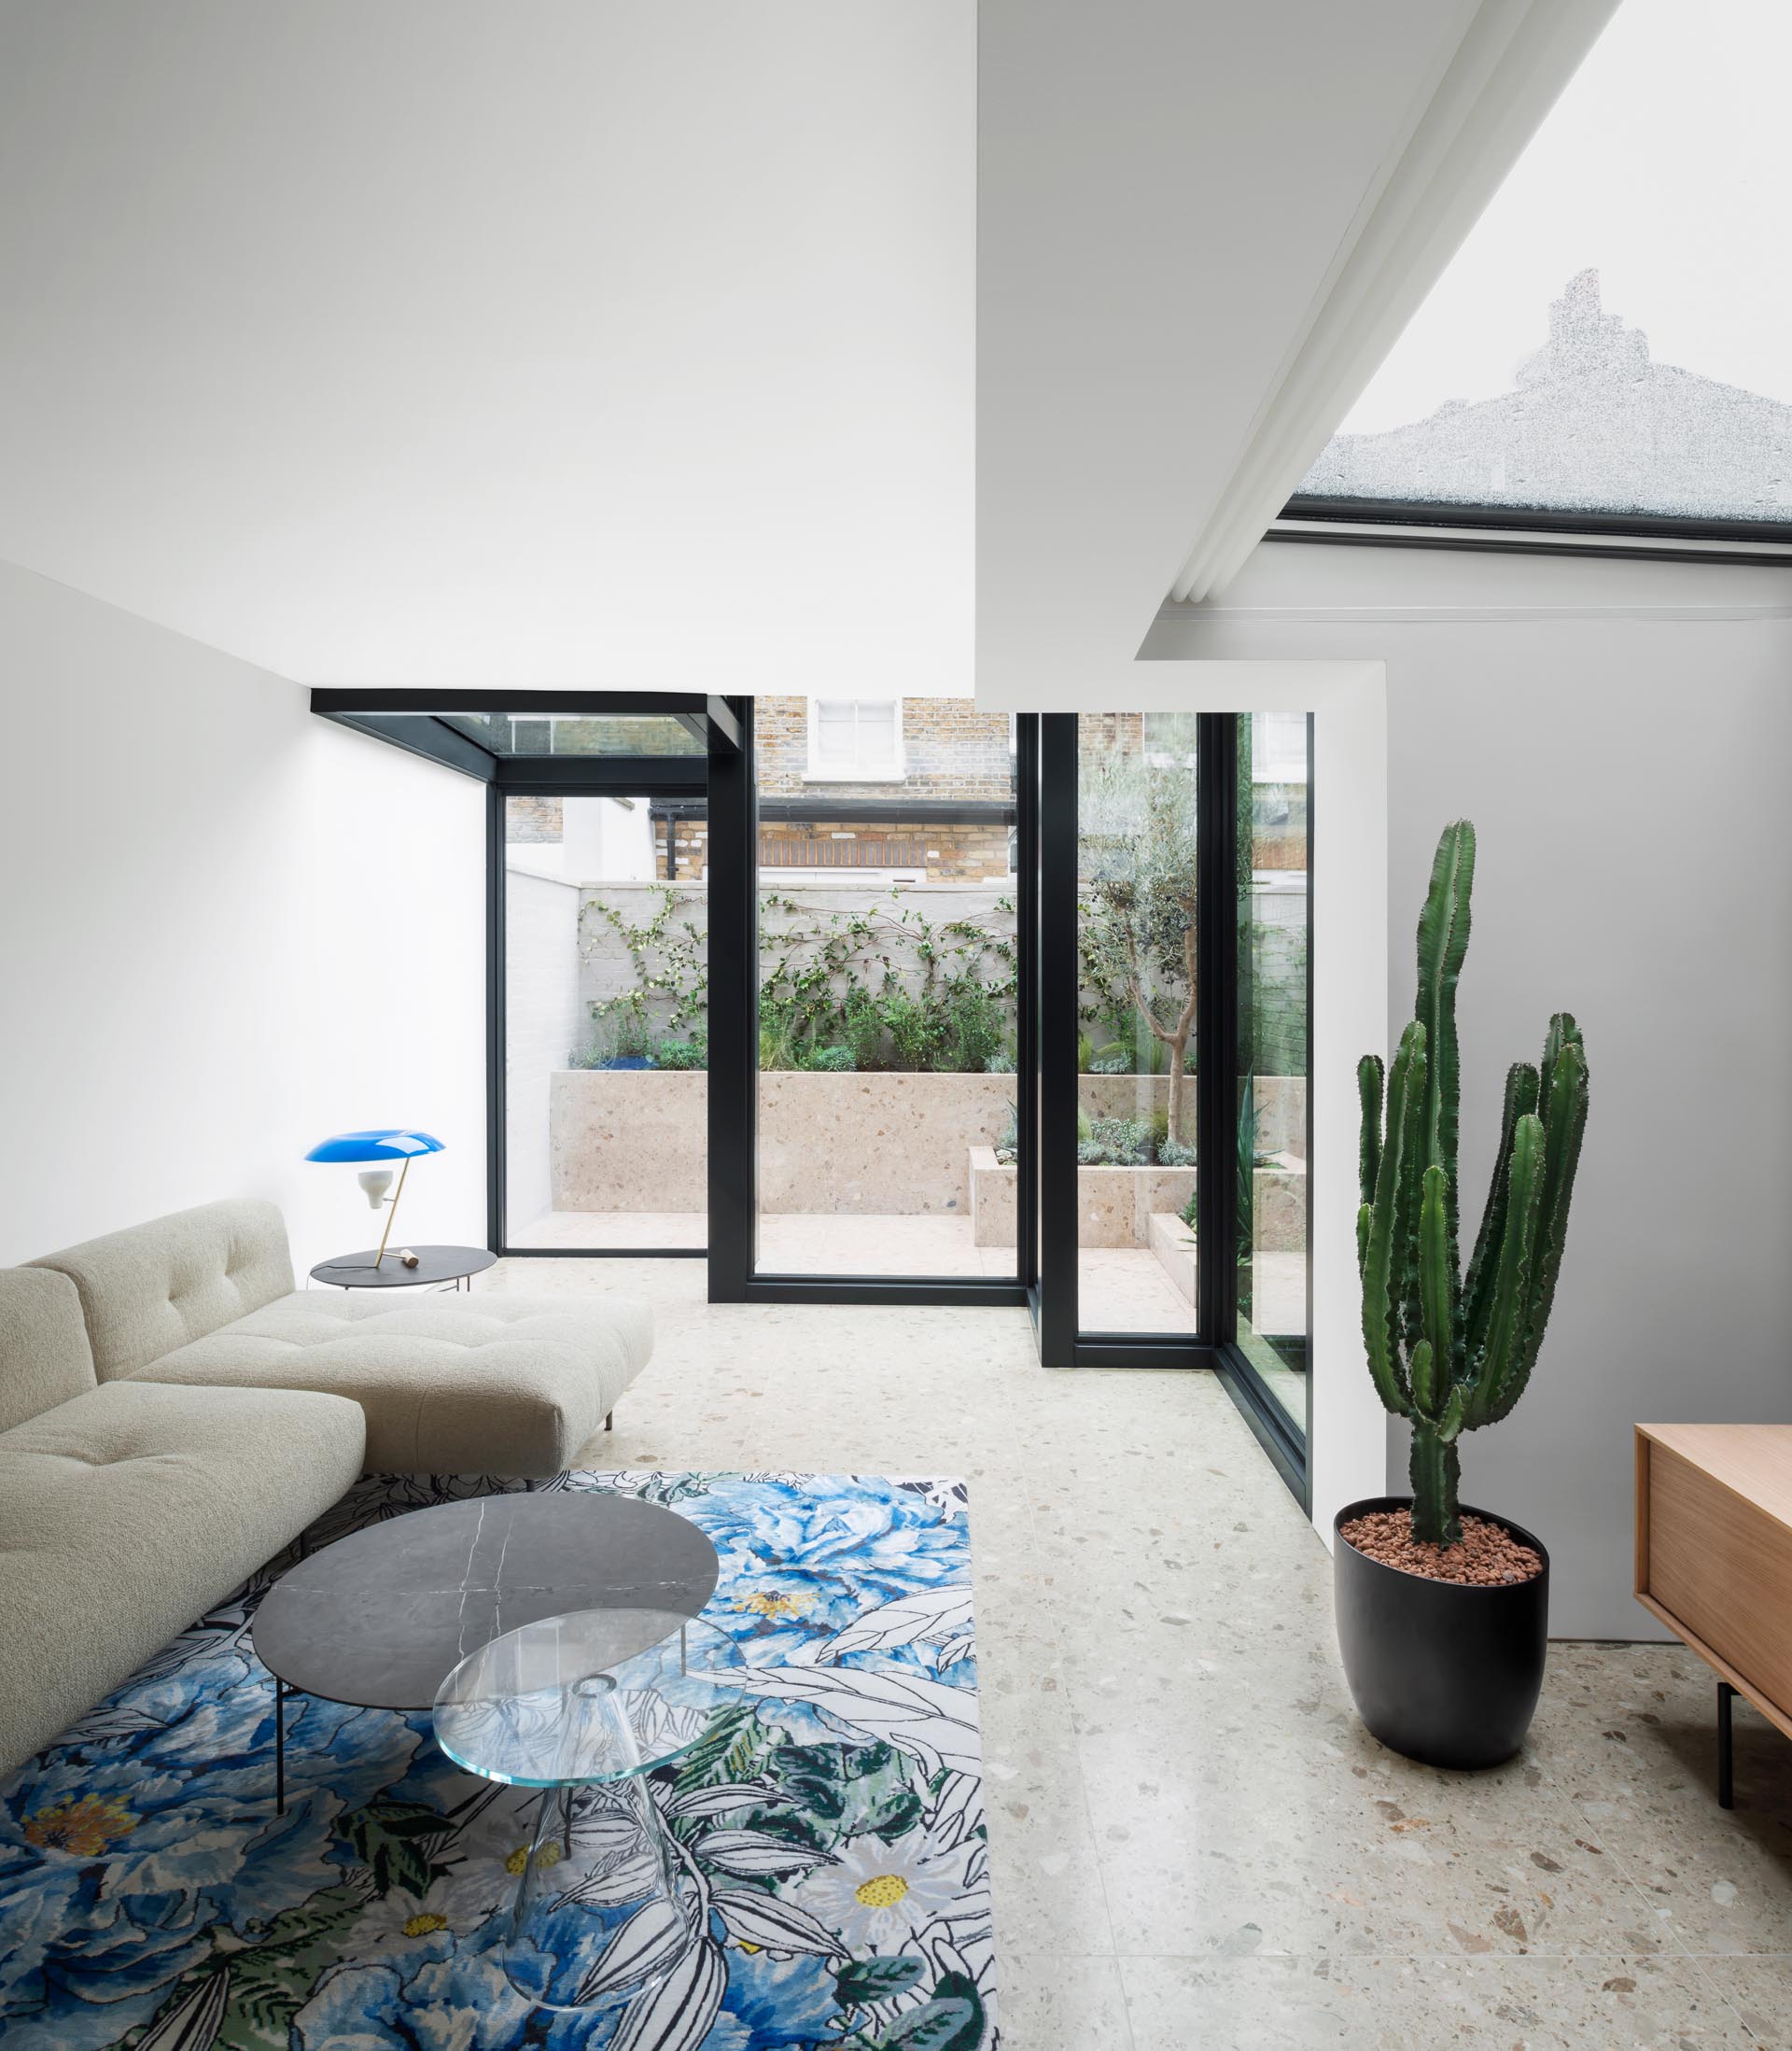 A modern house extension with Terrazzo flooring and thick black steel window frames.